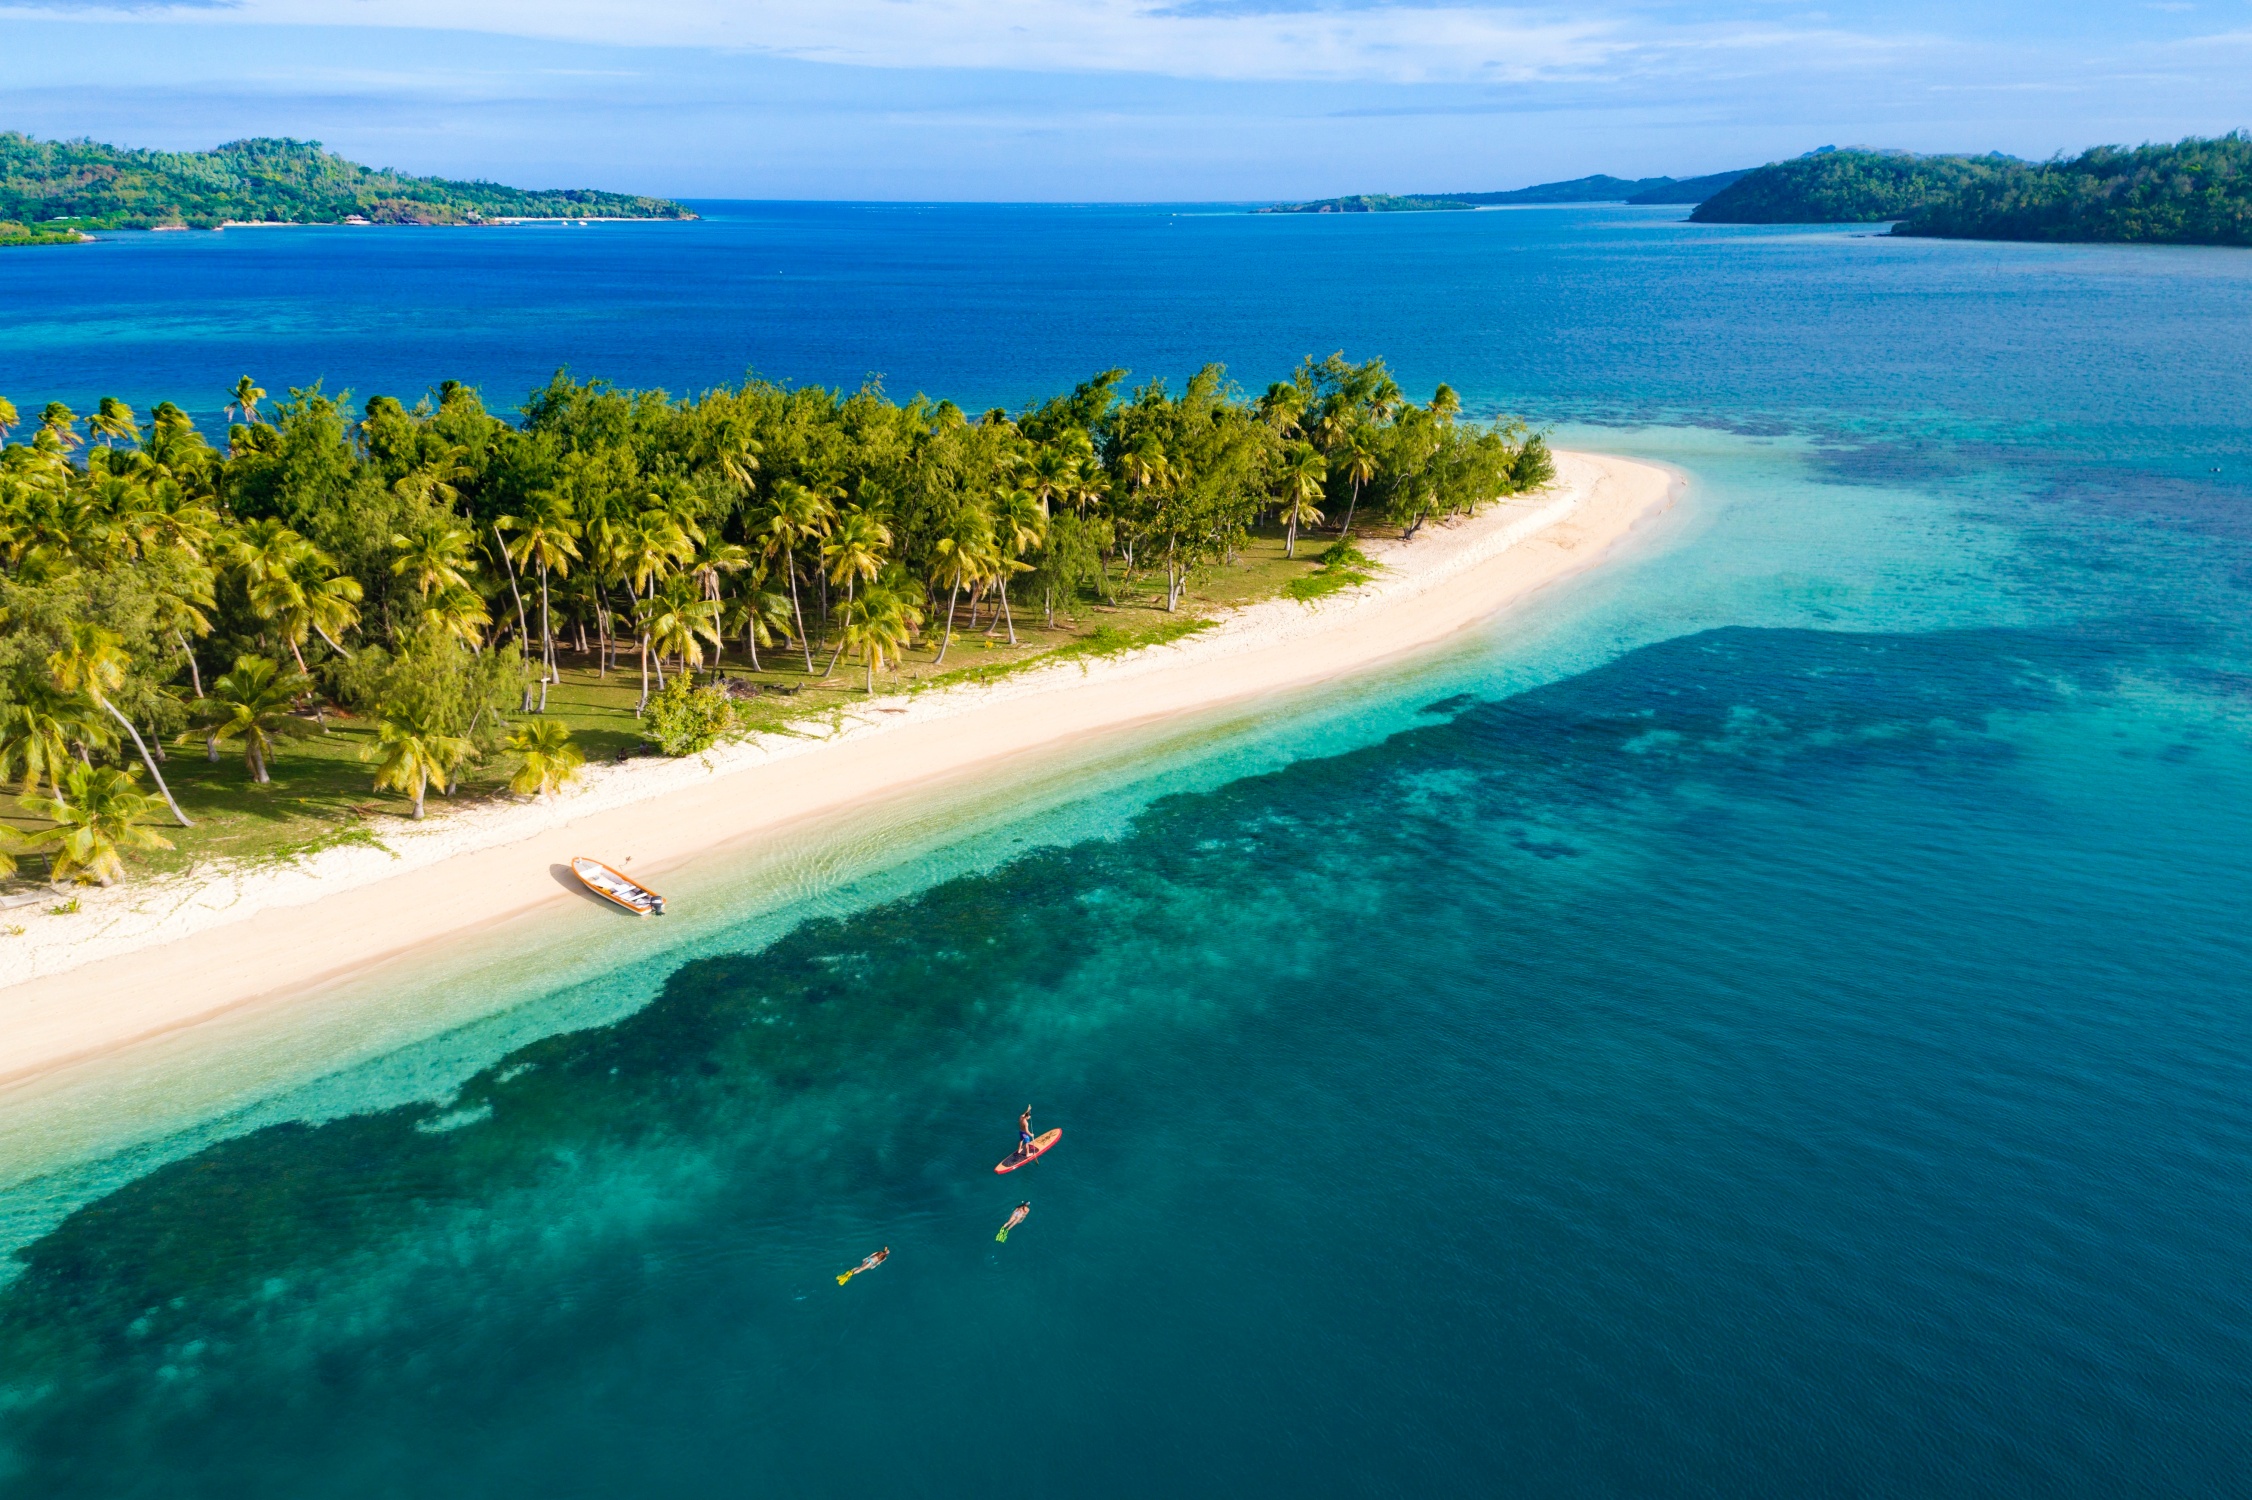 Explore Fiji's Underwater Paradise at These Must-try Scuba Diving Sites